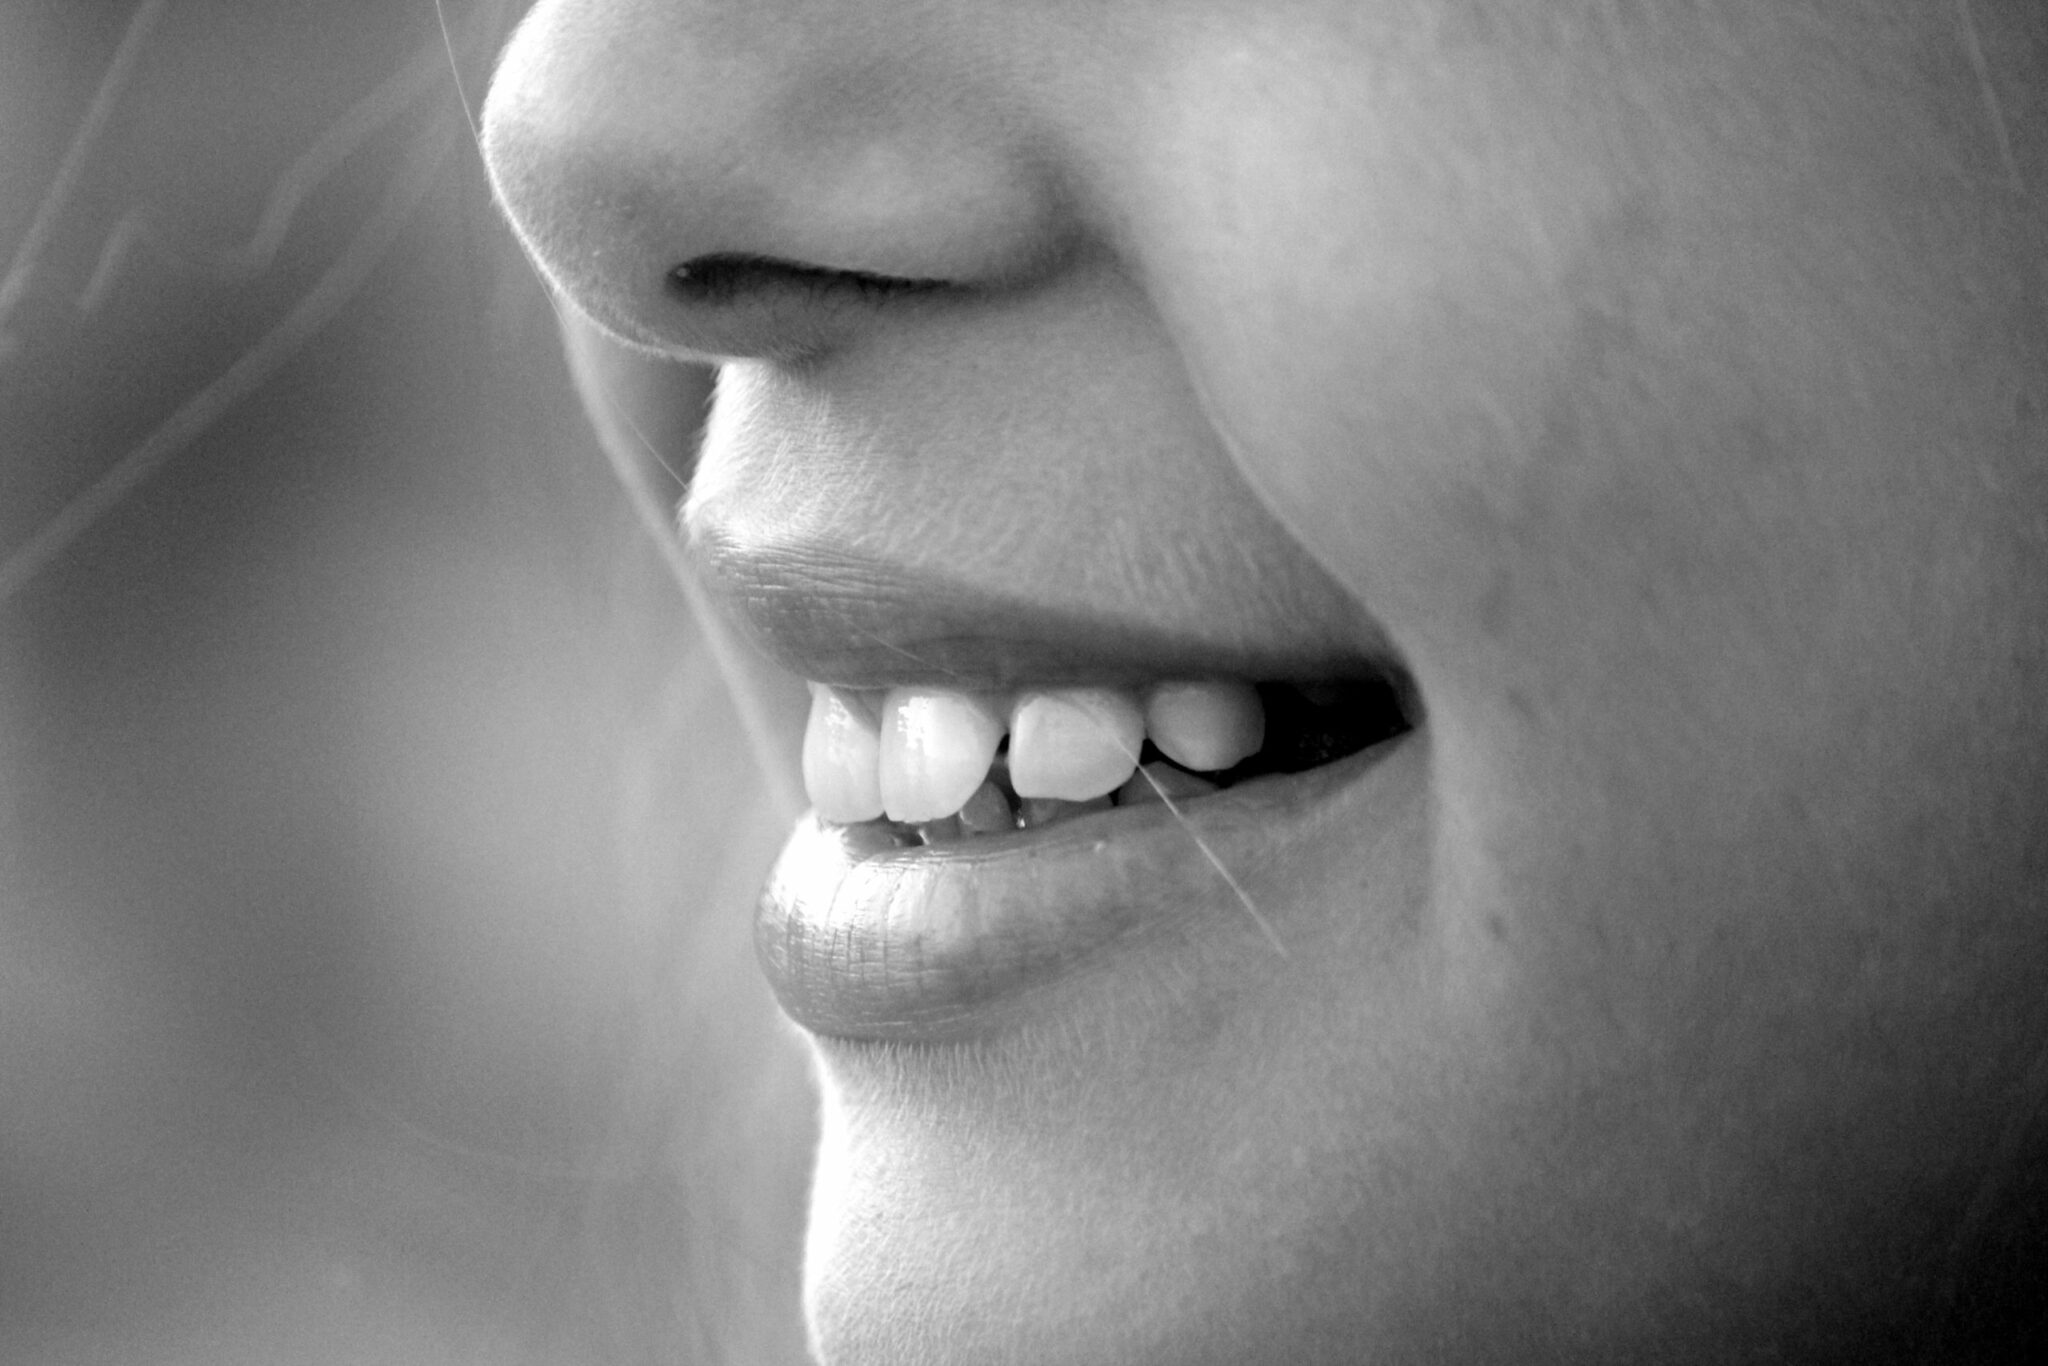 Sensitive Teeth: Getting to the Root of the Problem